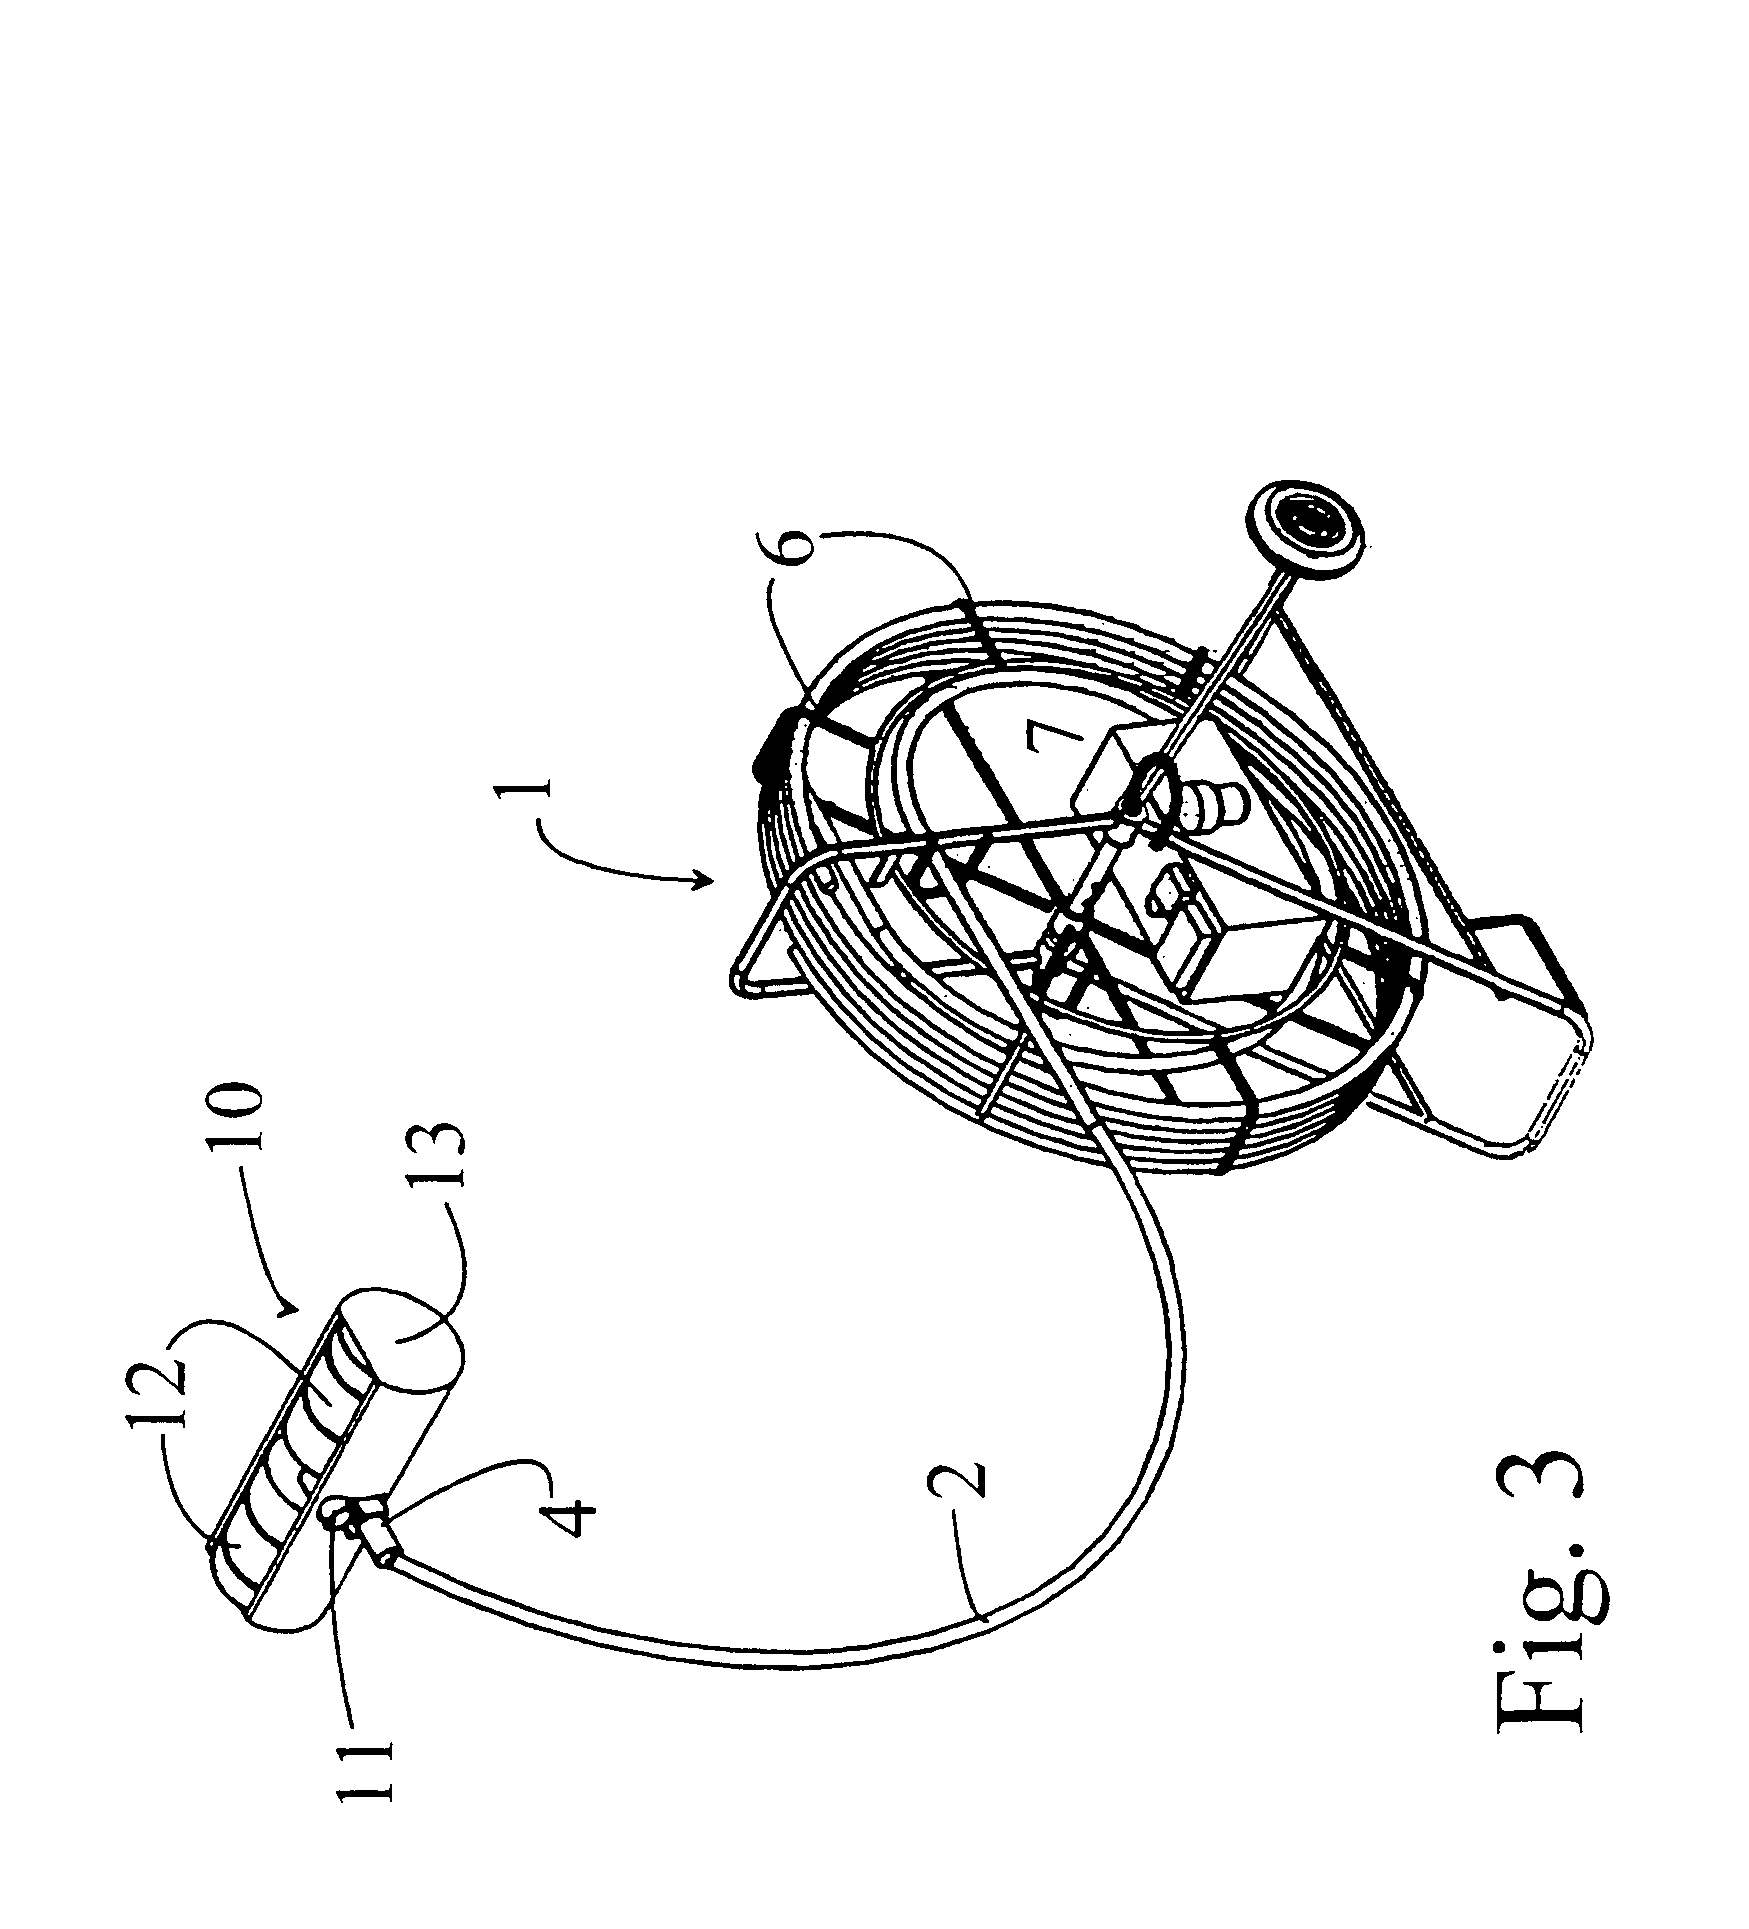 Apparatus for cleaning channels for air conditioning and other purposes